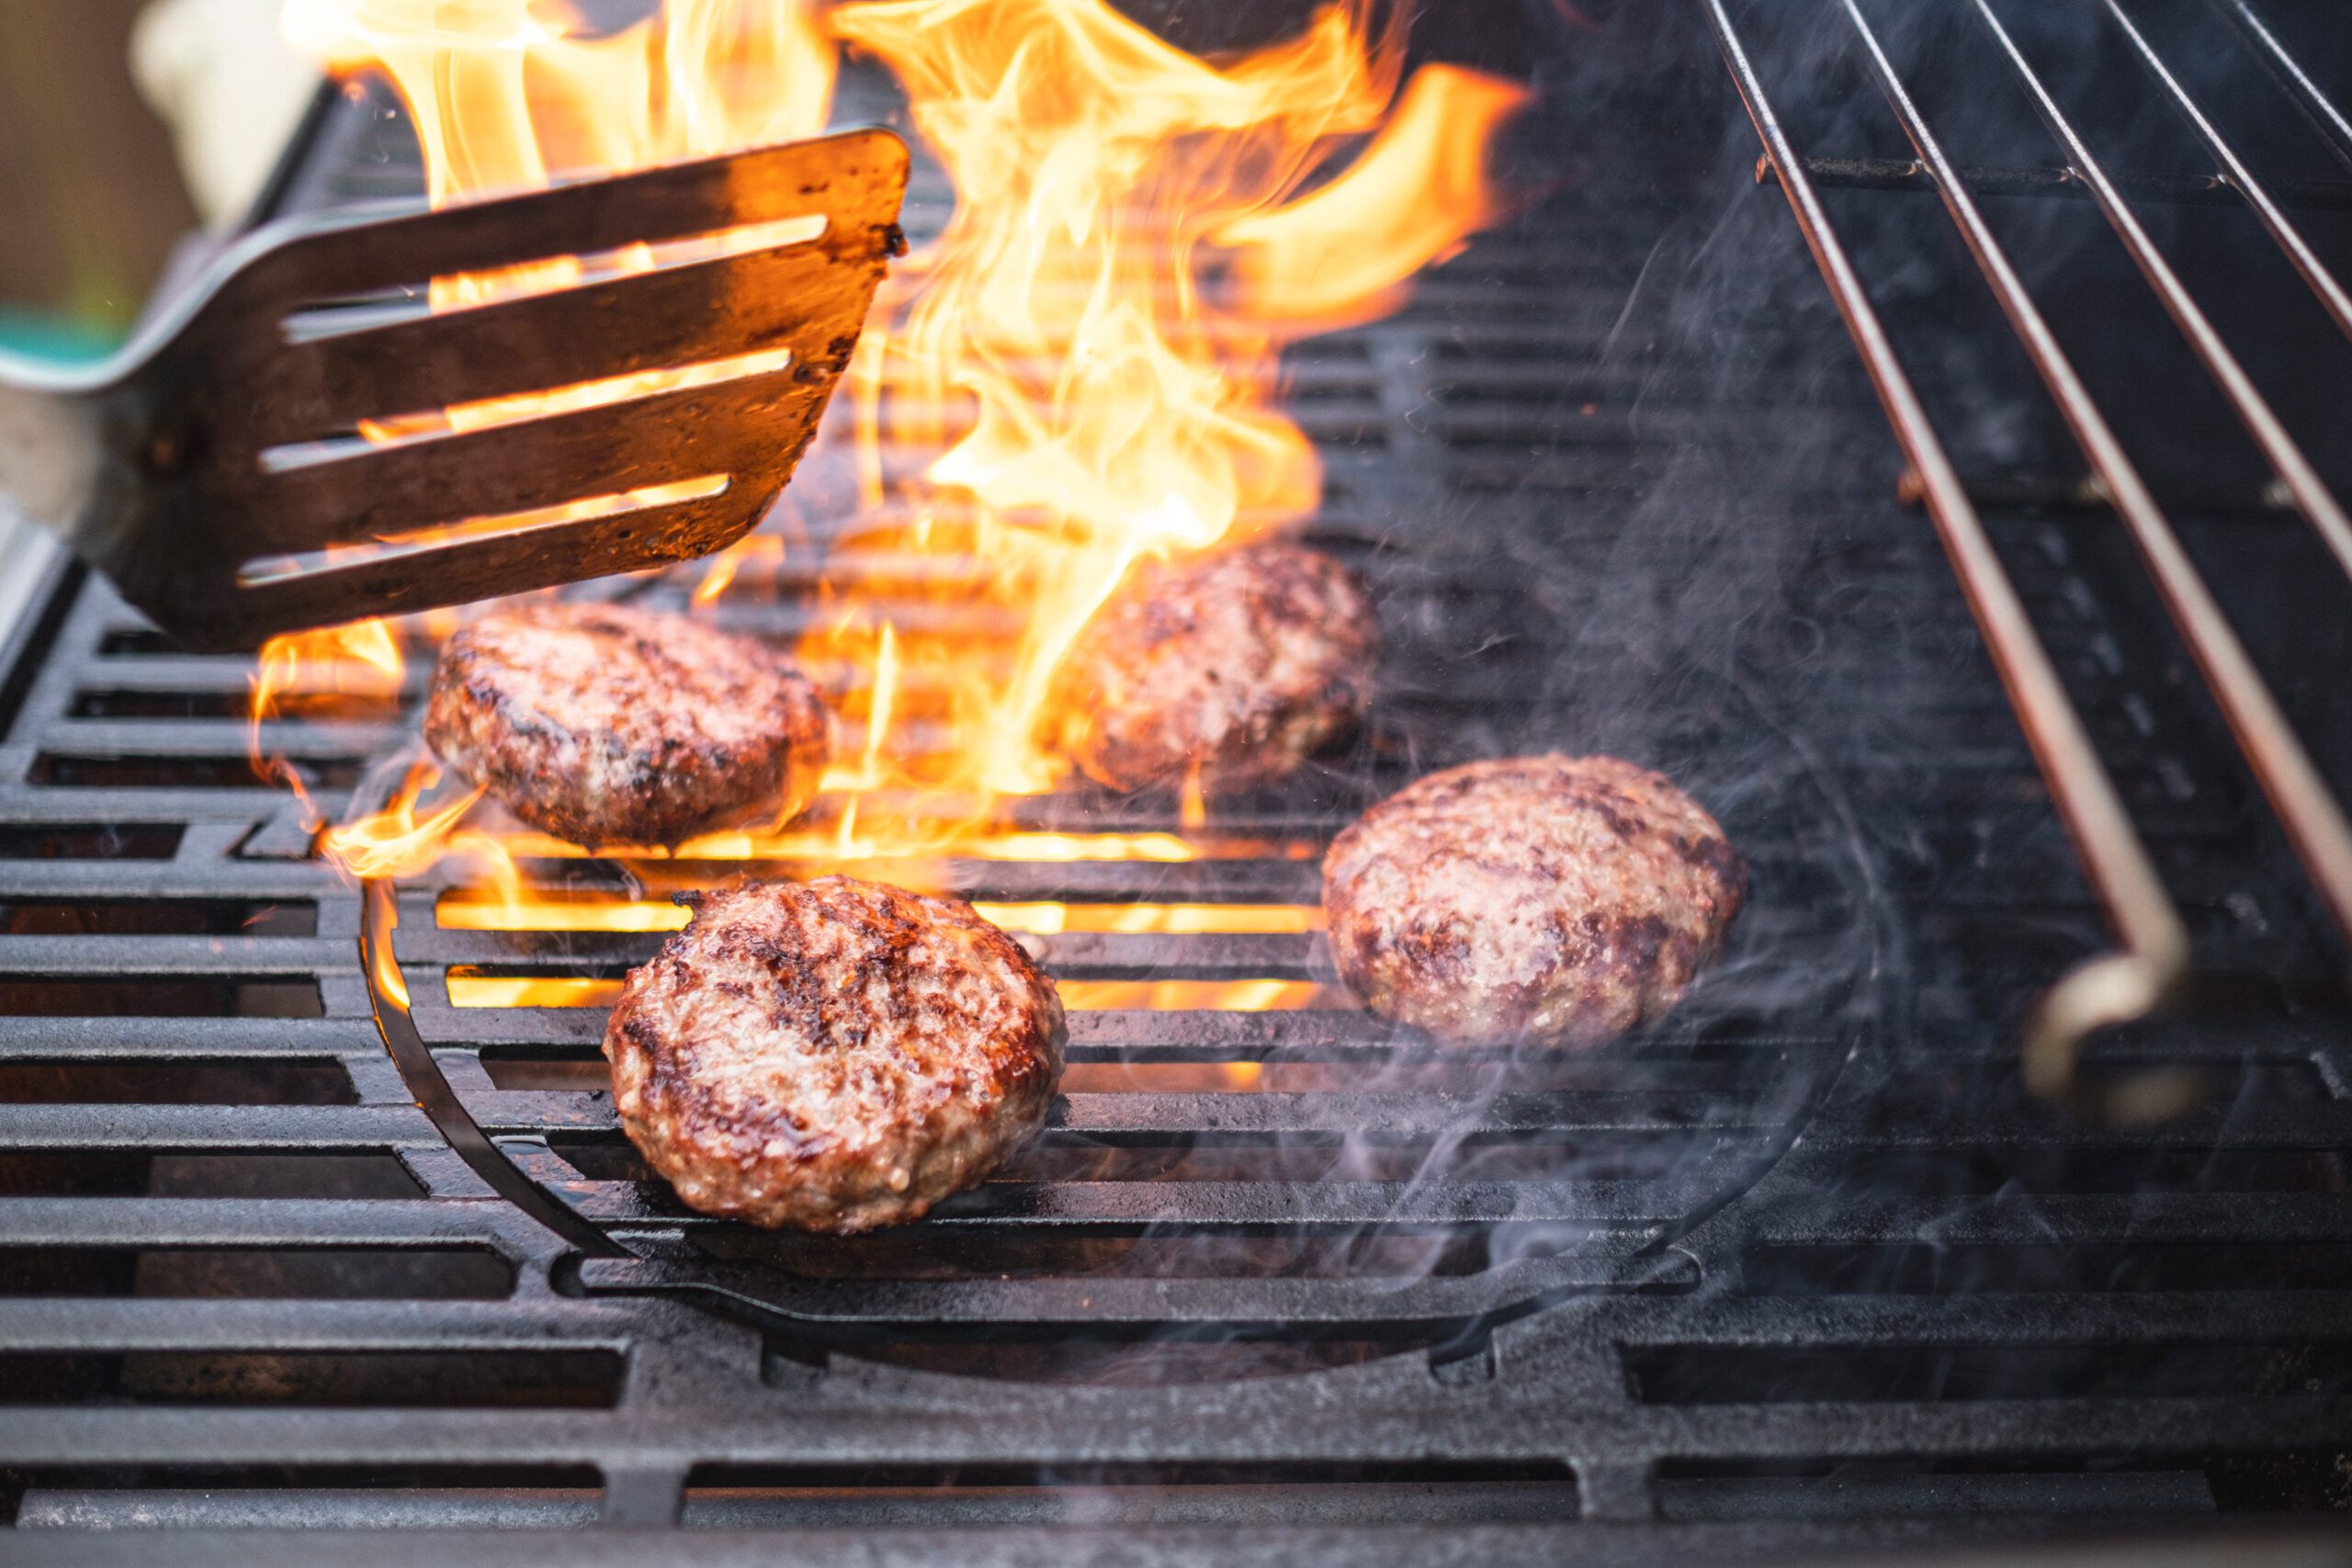 The crucial tool you need for perfect Memorial Day grilling